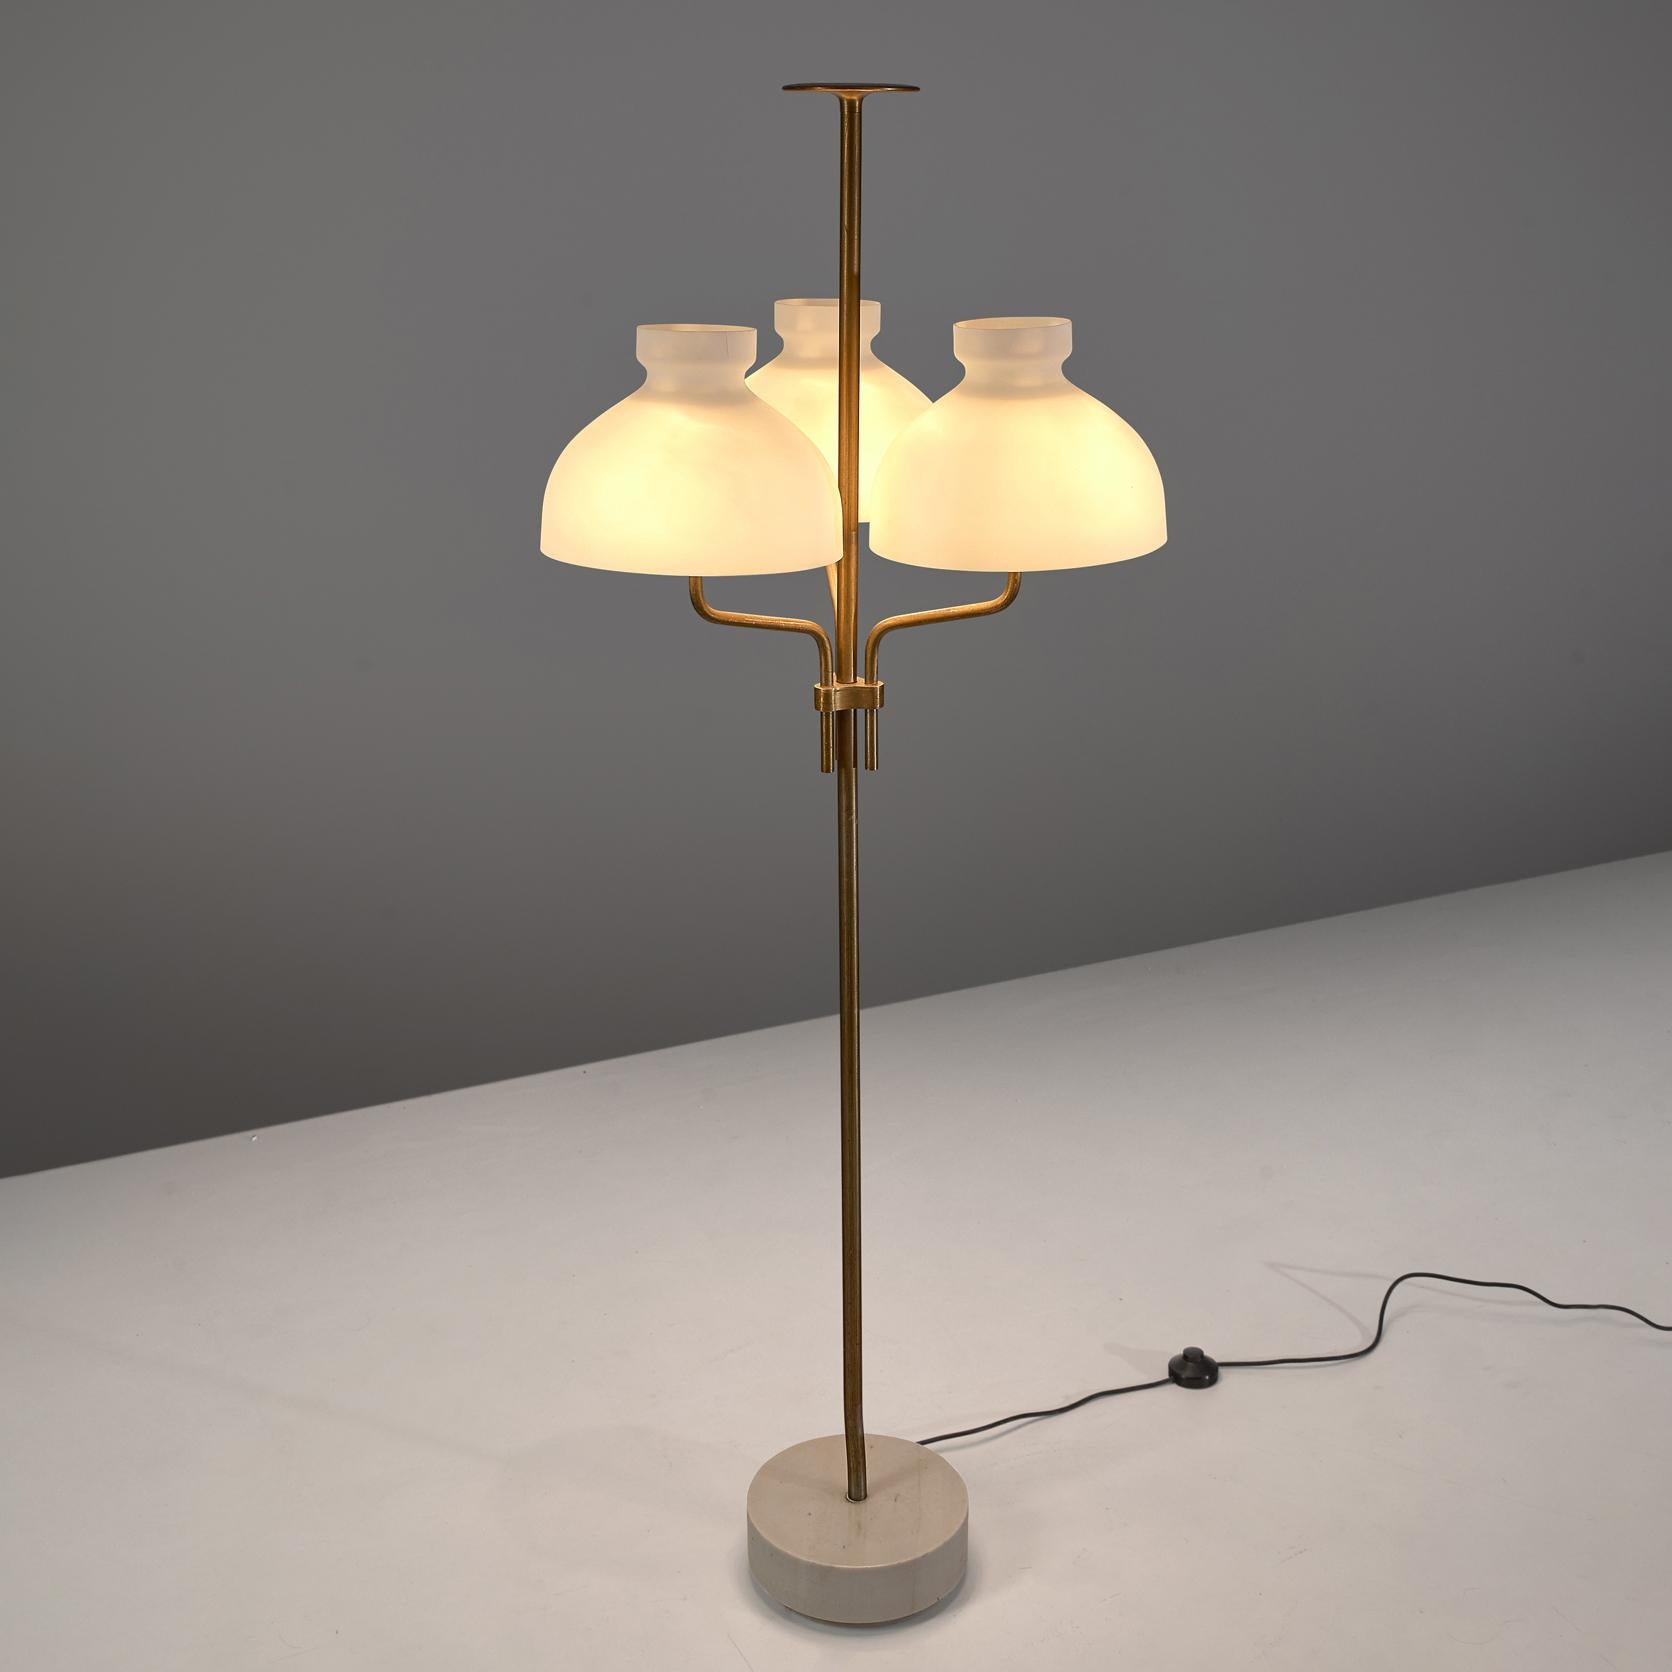 Ignazio Gardella, floor lamp 'Arenzano', brass, marble, opaline glass, Italy, 1950s

An elegant floor lamp designed by the Italian architect and designer Ignazio Gardella. The base is made of tubular brass, curved and grafted together to hold the